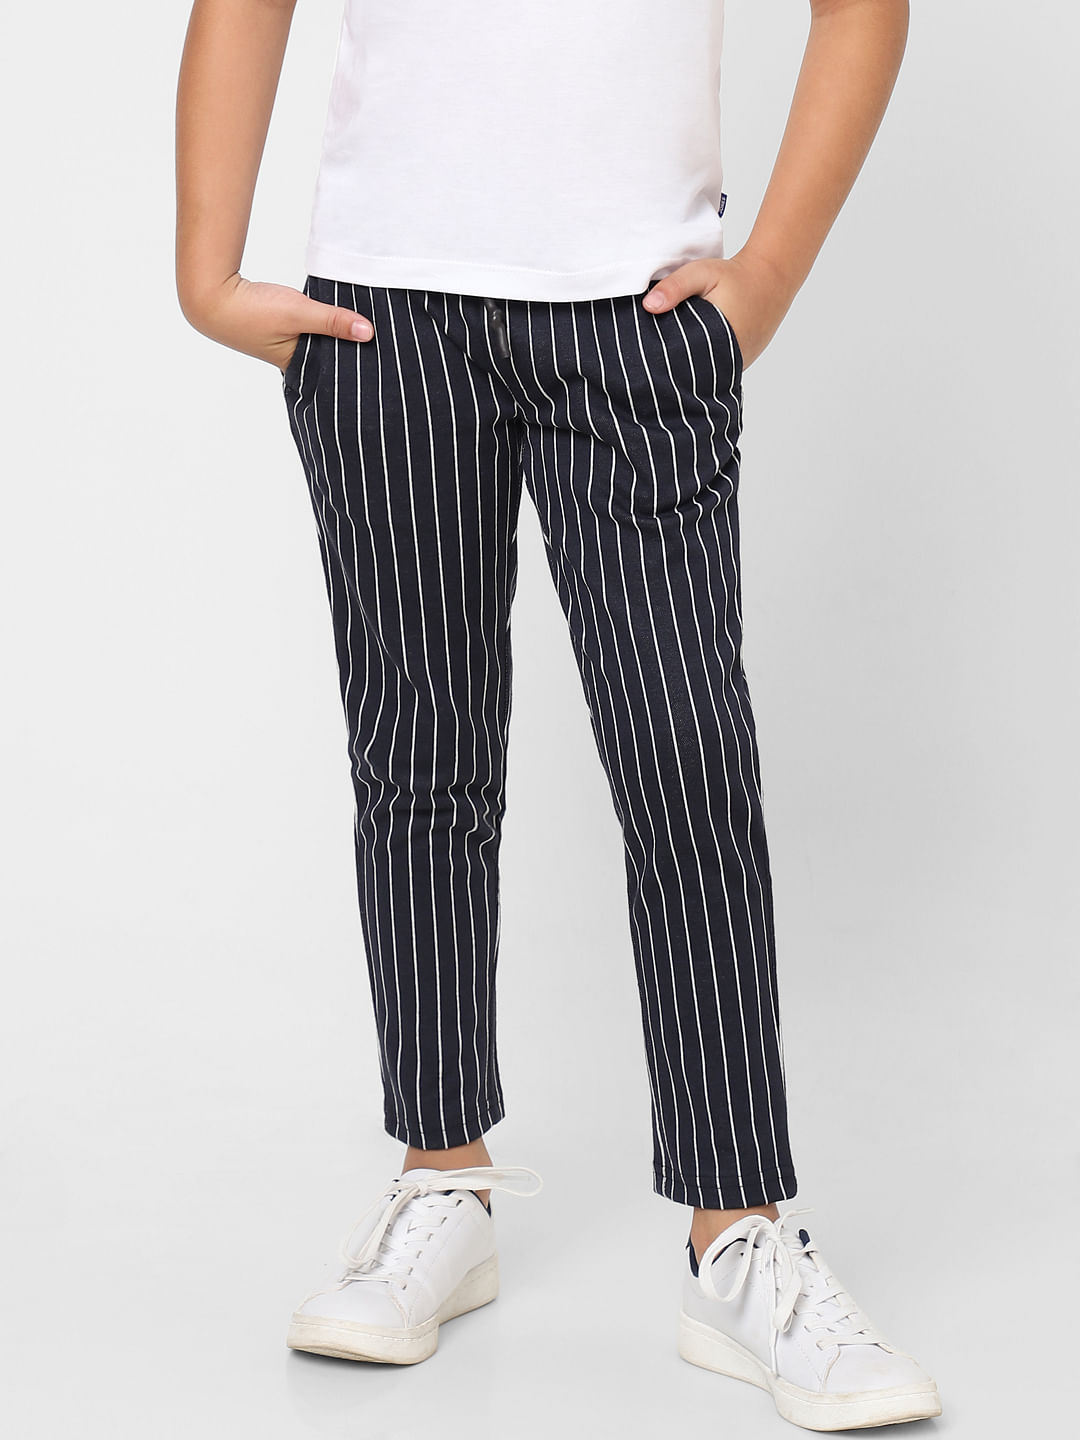 Buy White Mid Rise Striped Pants For Women Online in India  VeroModa